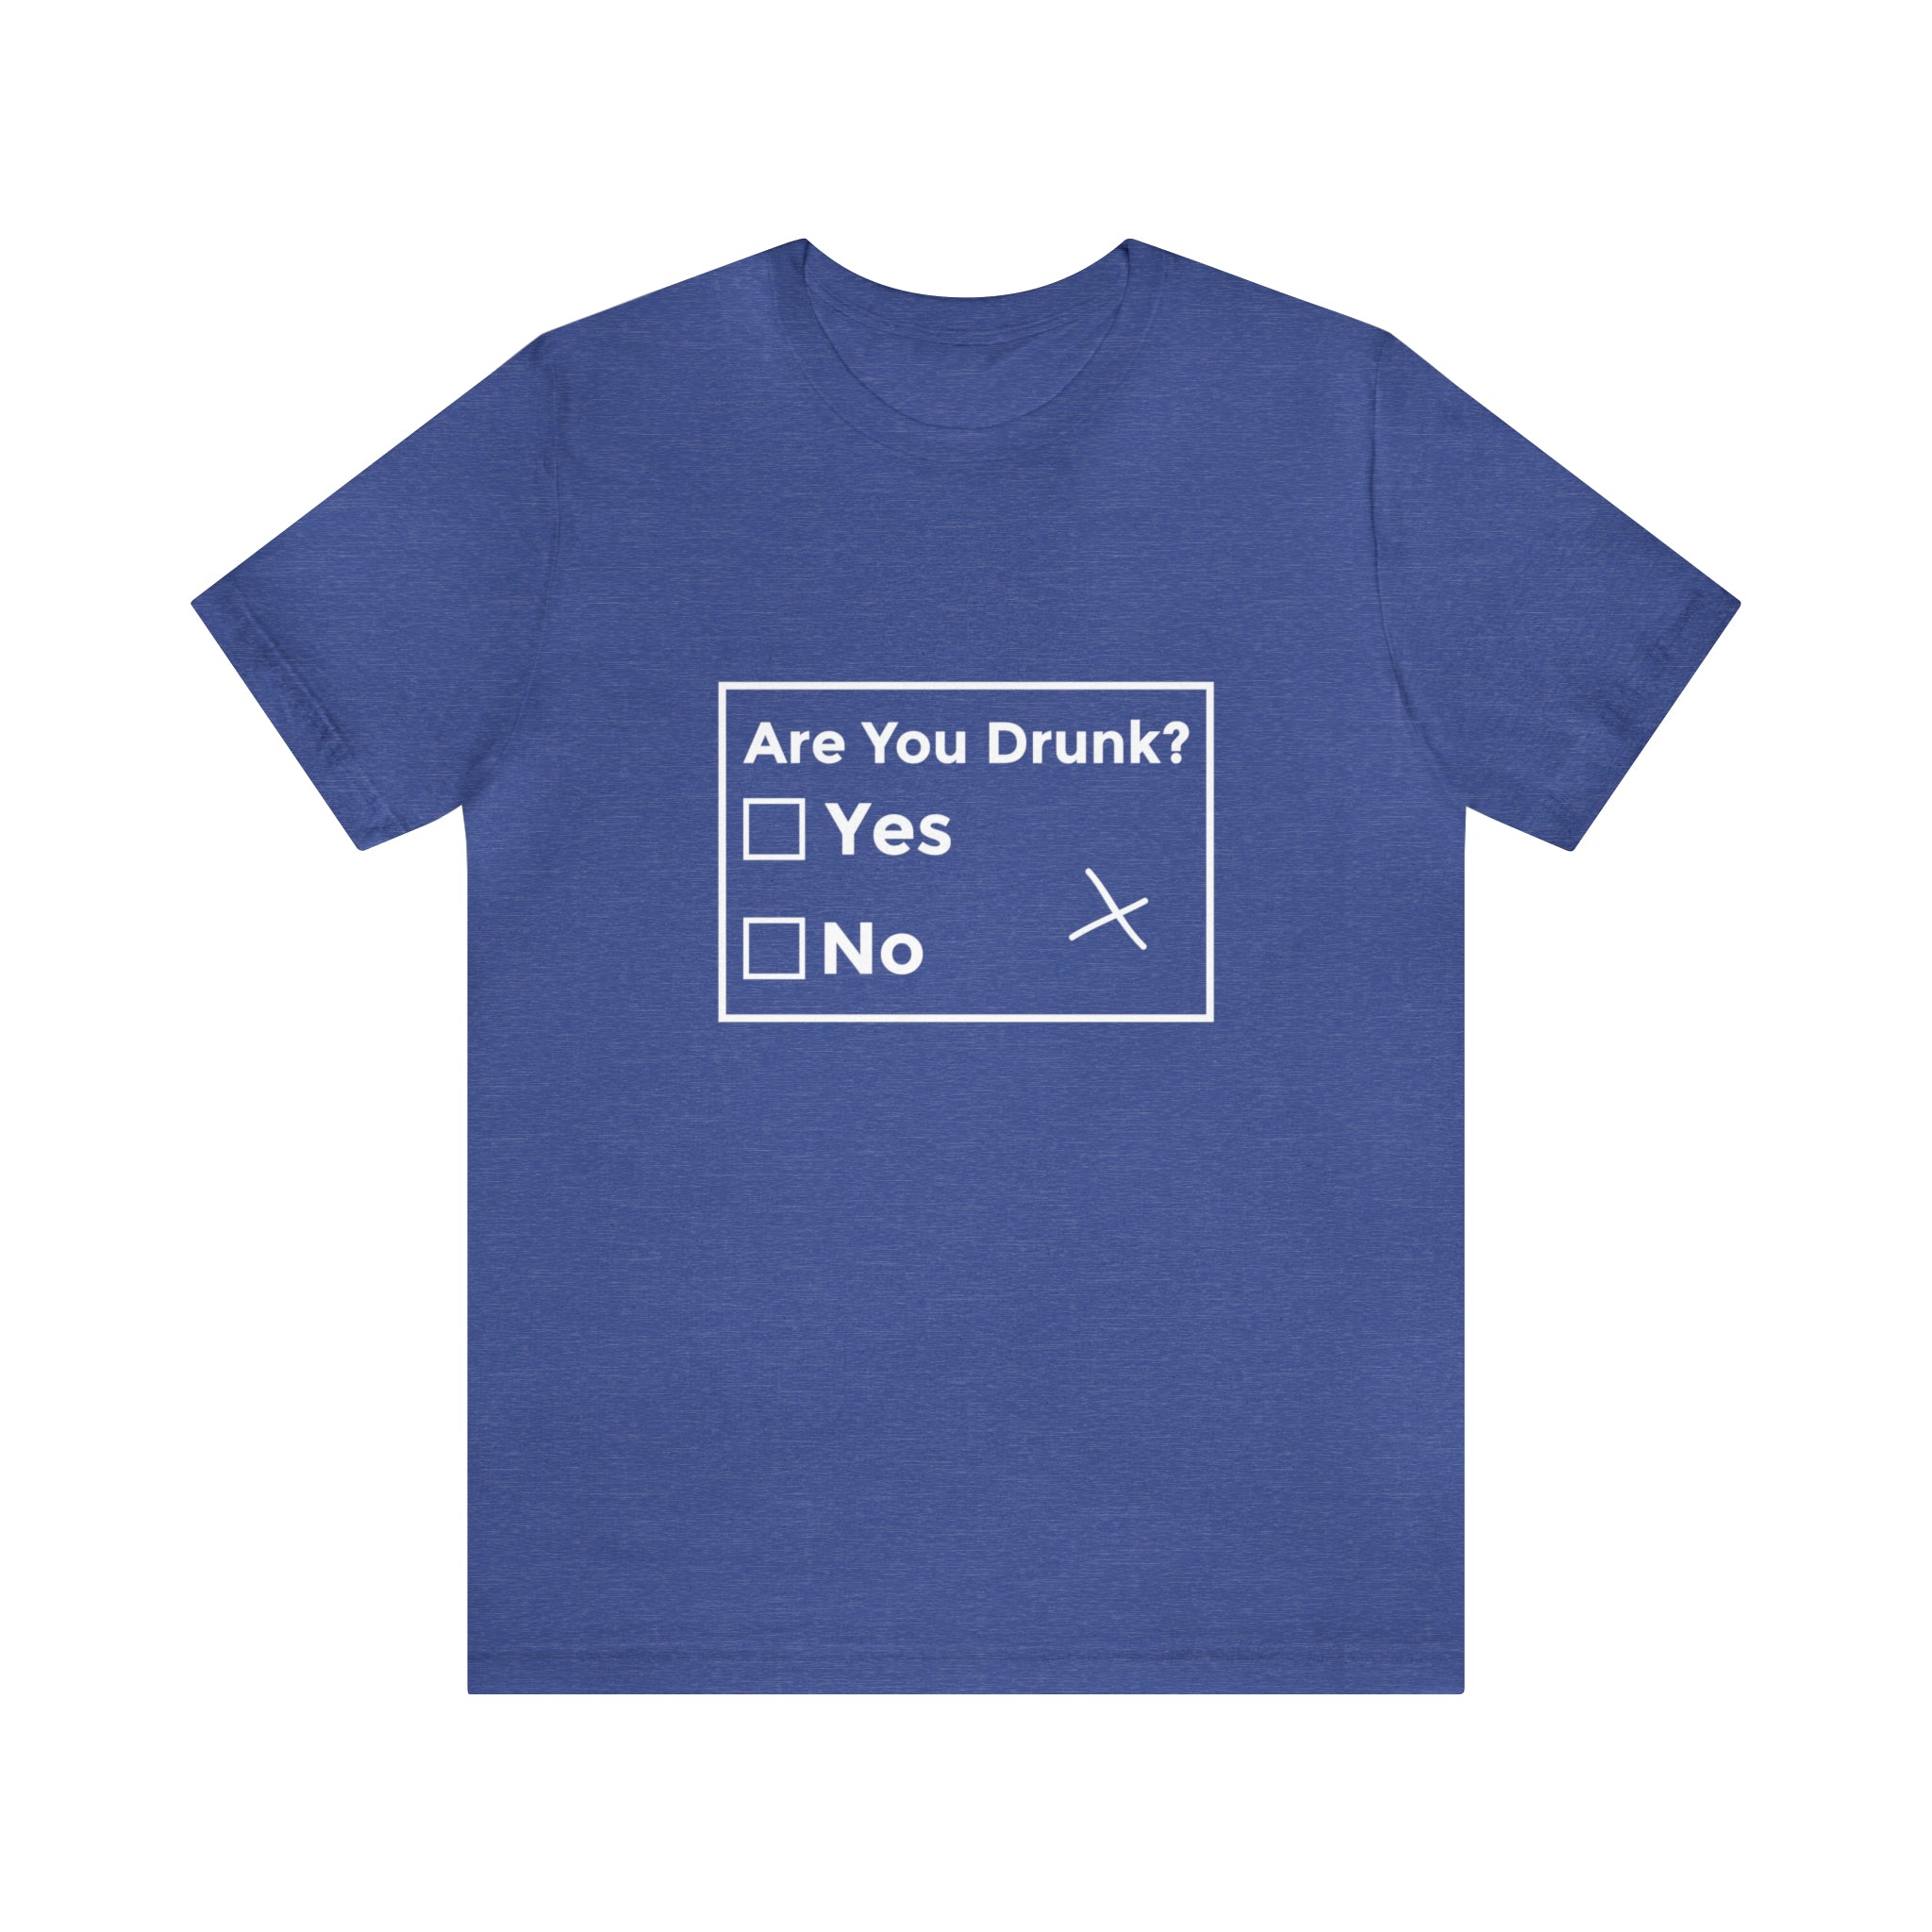 A blue Are You Drunk? T-Shirt with white slogan text.